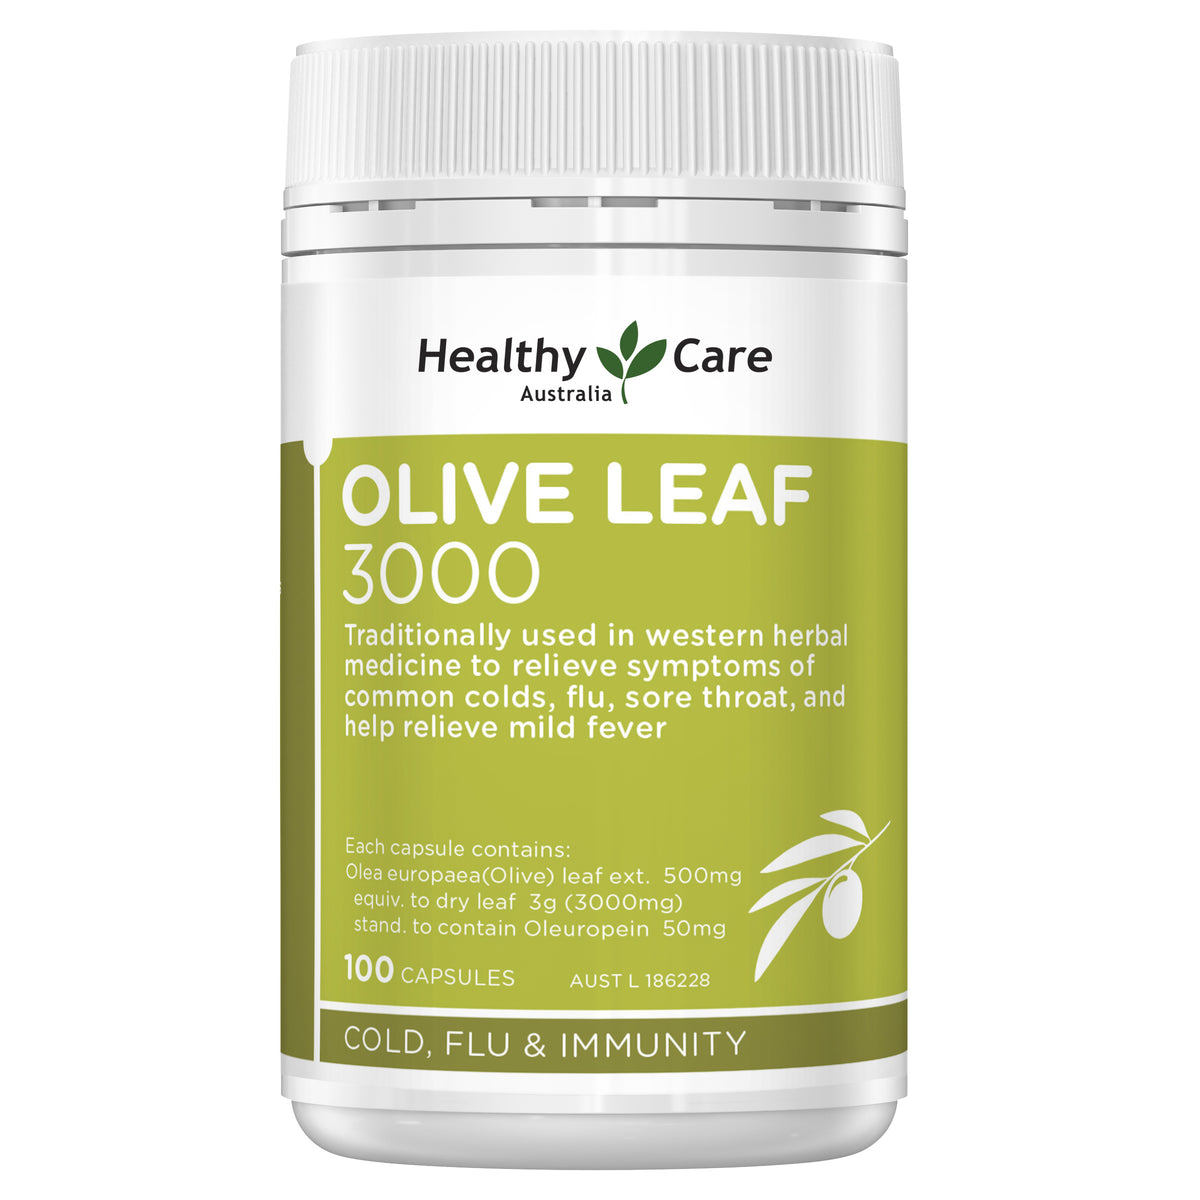 Healthy Care Olive Leaf 3000 - 100 capsules